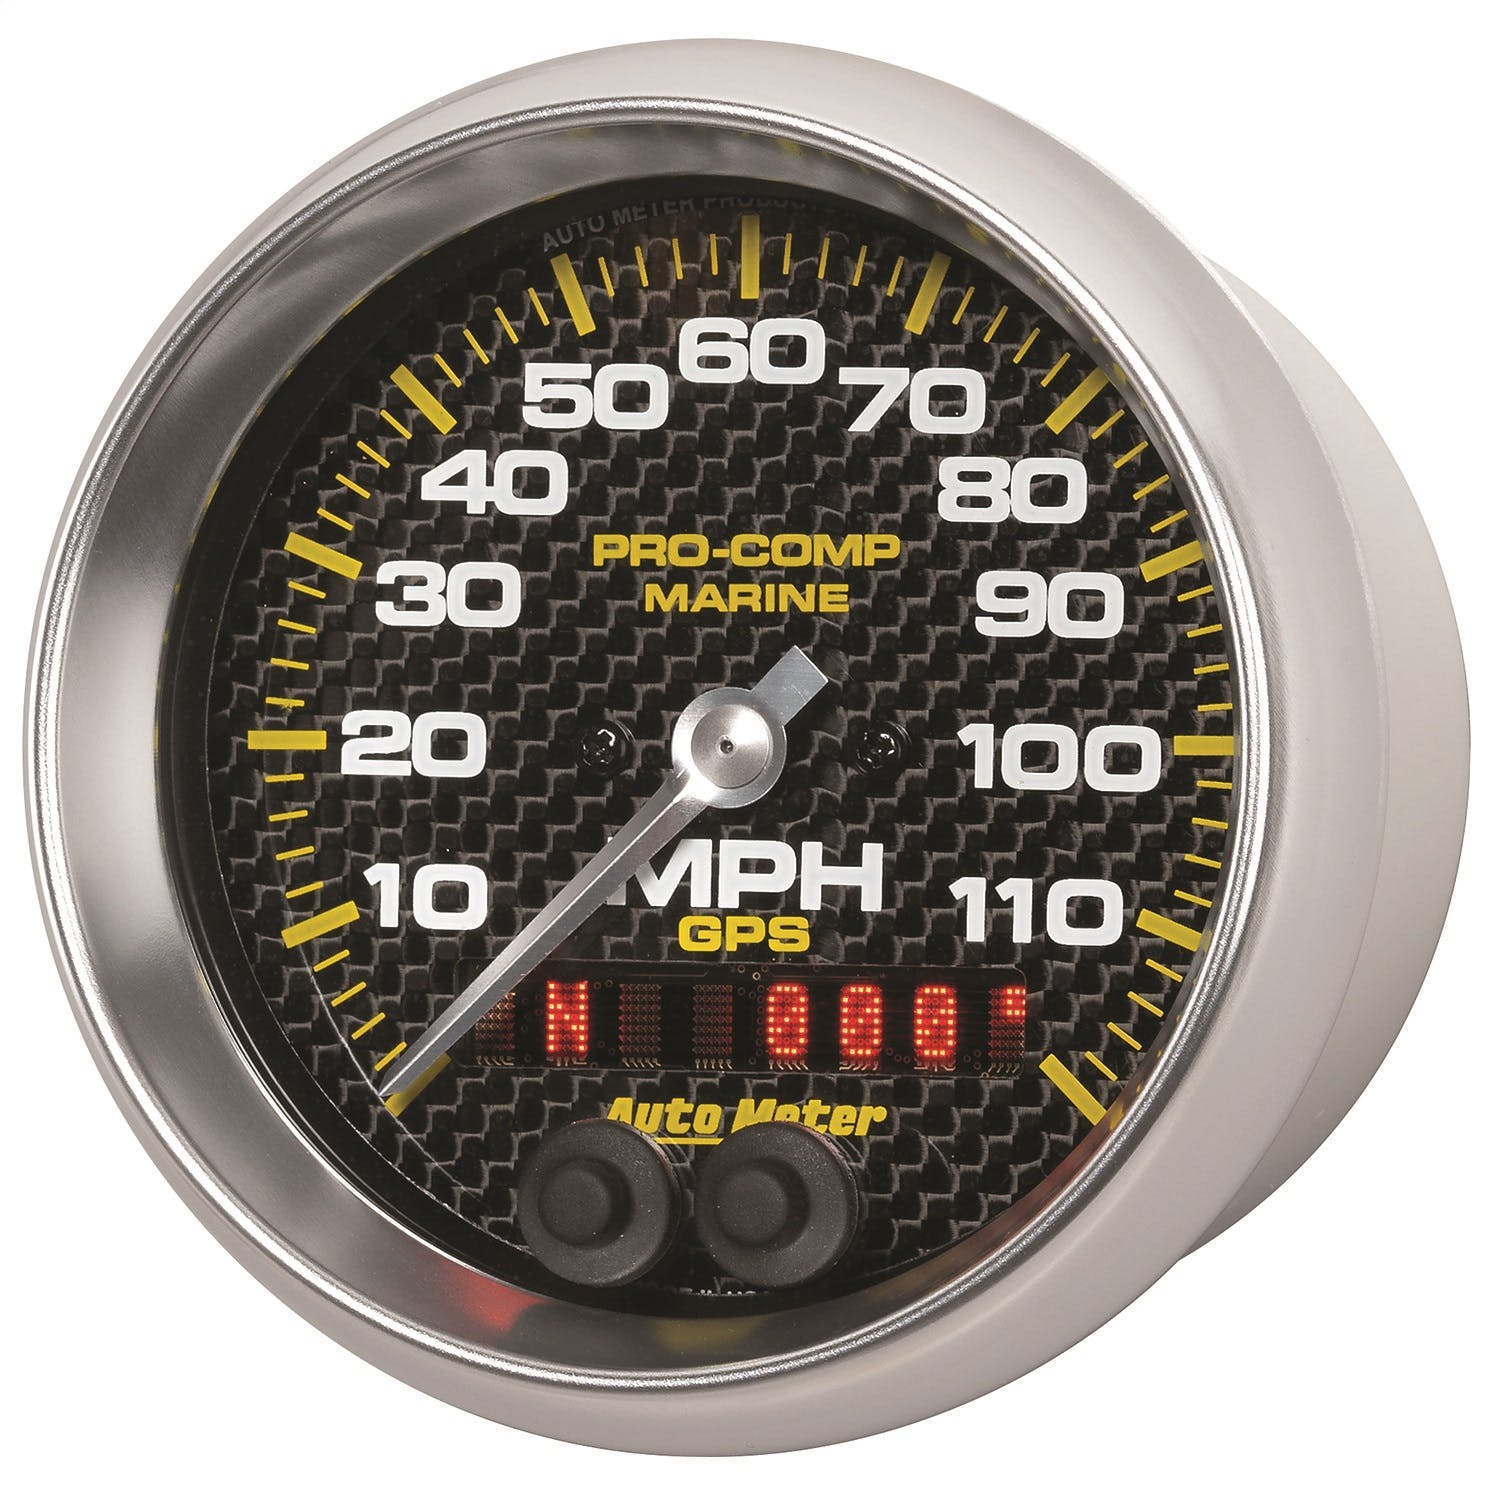 AutoMeter Products 200637-40 Gauge; Speedometer; 3 3/8in.; 120mph; GPS; Marine Carbon Fiber